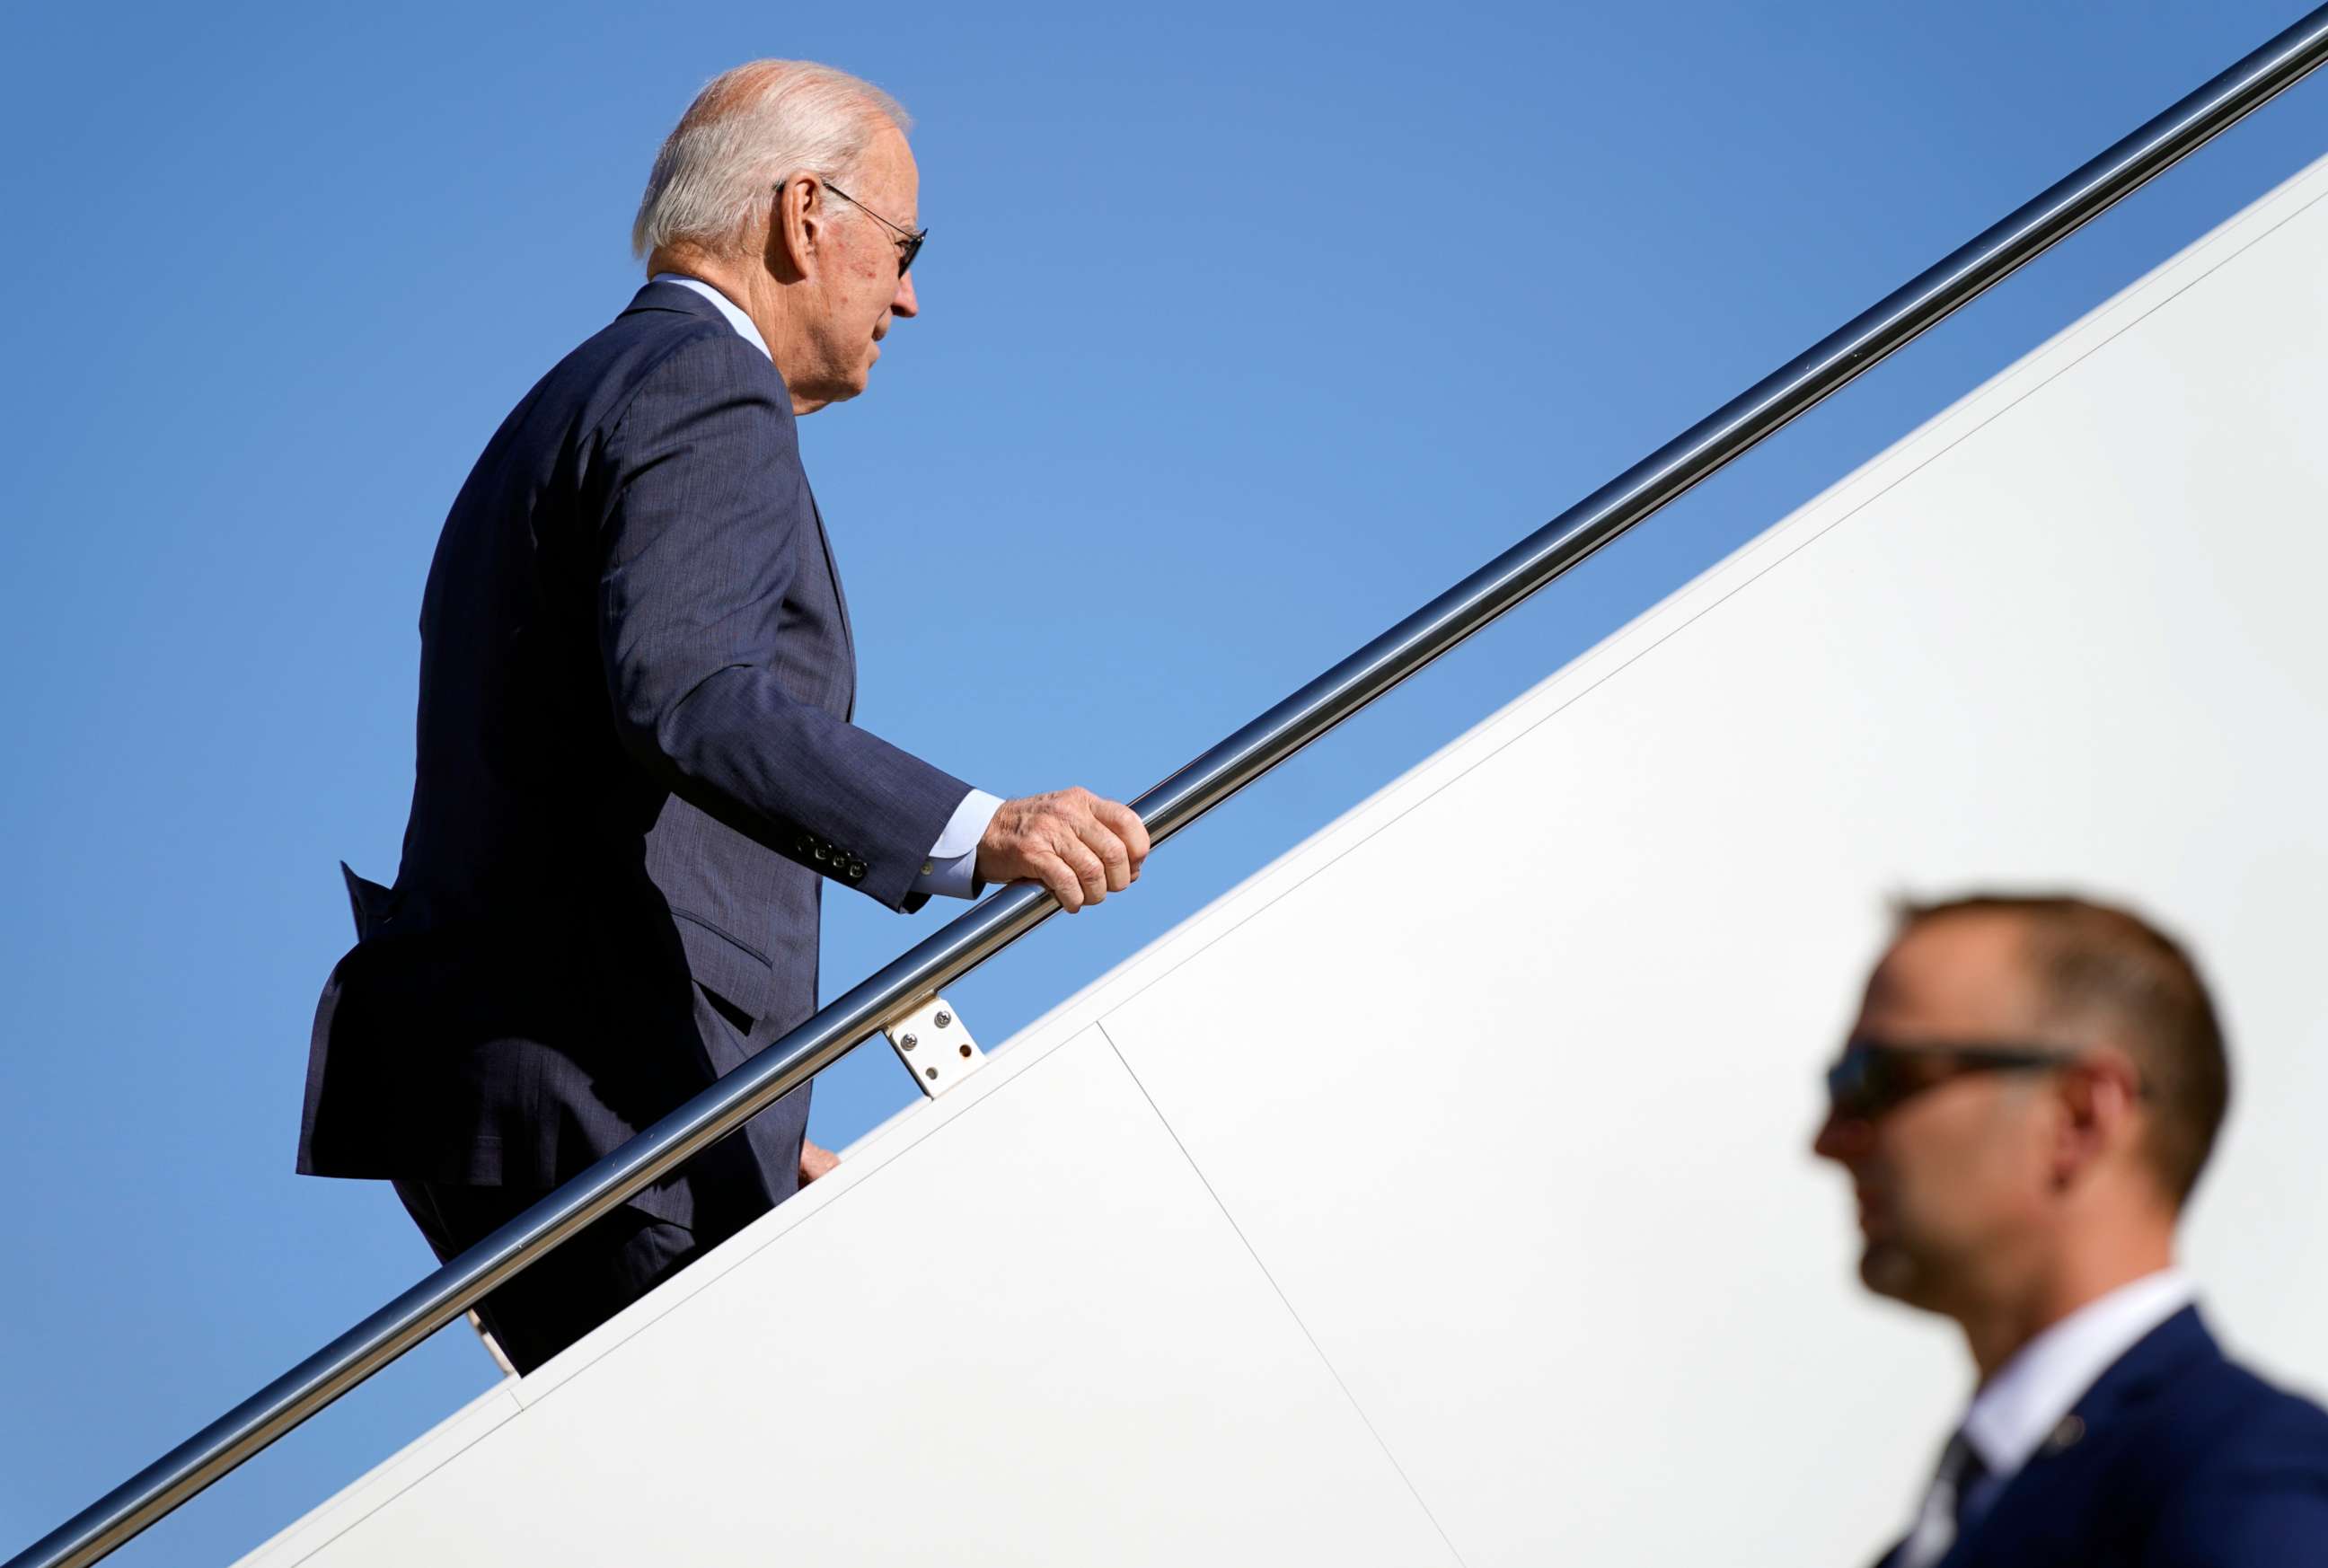 PHOTO: President Joe Biden boards Air Force One, Oct. 20, 2022, at Andrews Air Force Base, Md.